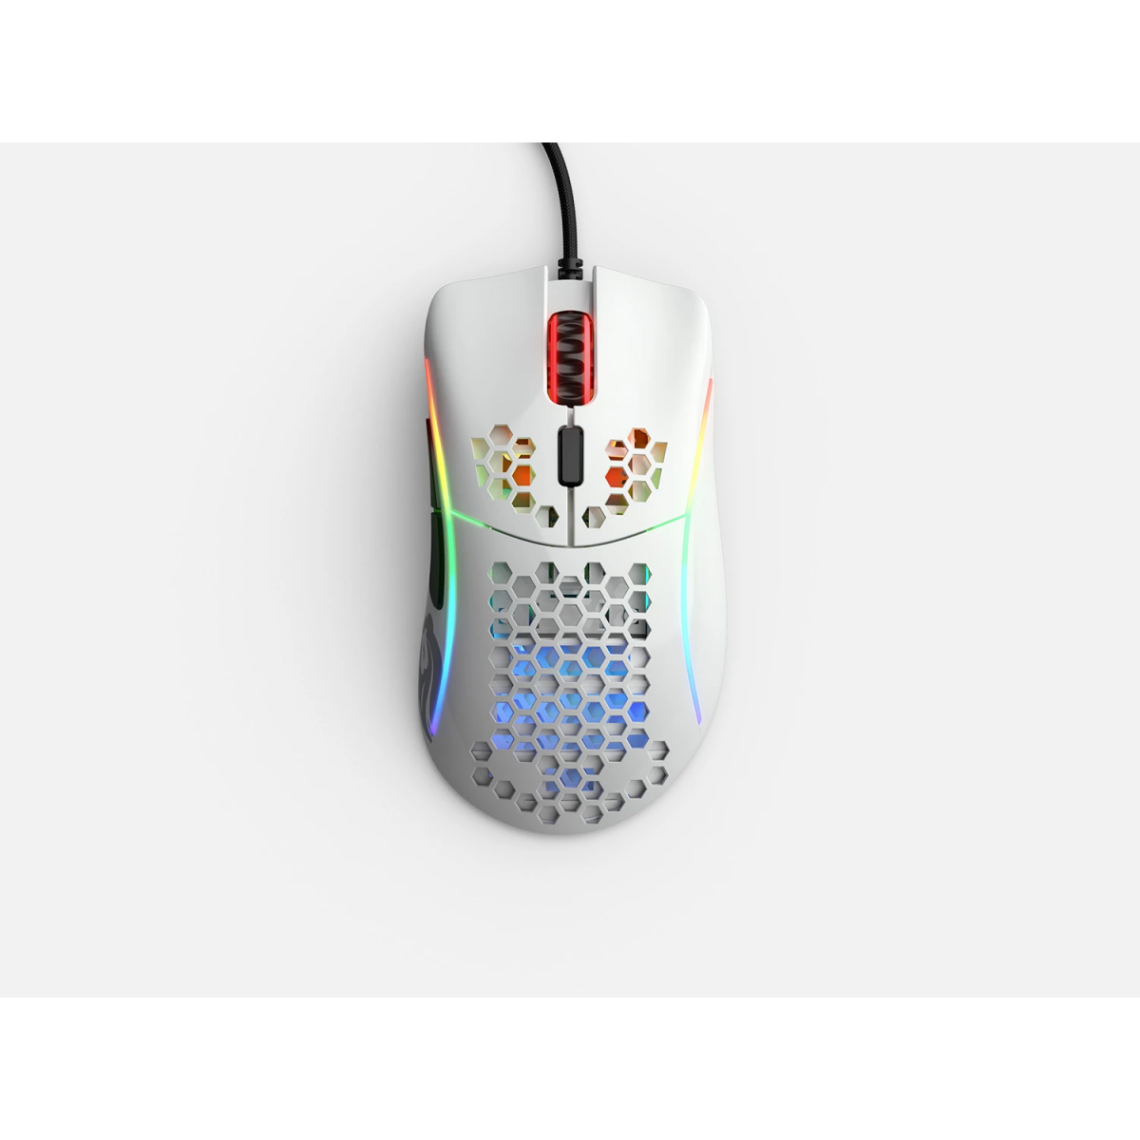 Glorious Pc Gaming Race Model D- Souris Gaming - Blanche brillante